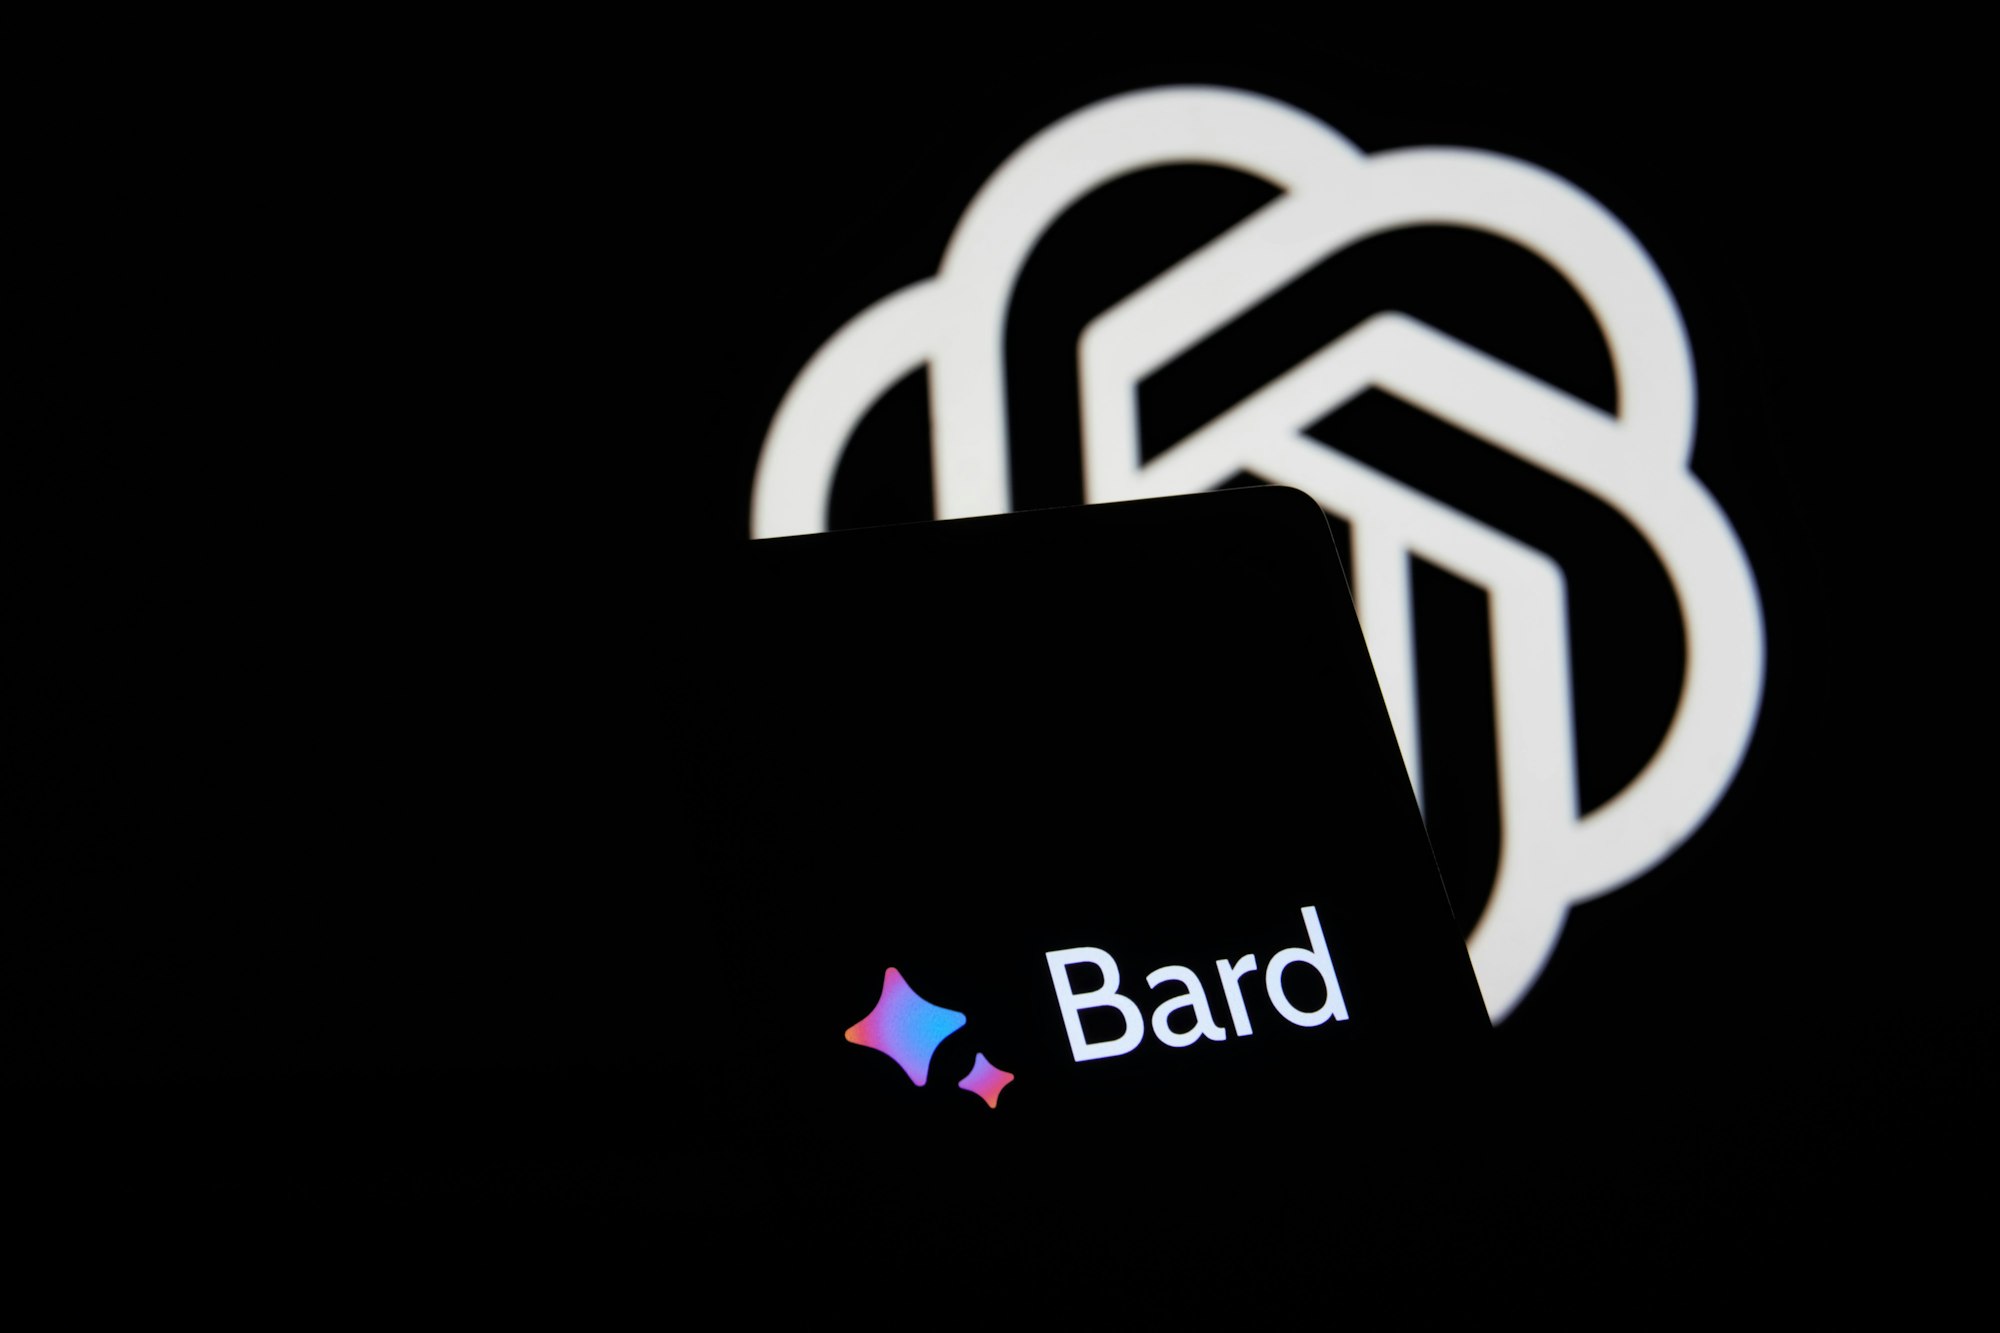 Google Bard: Features and Capabilities